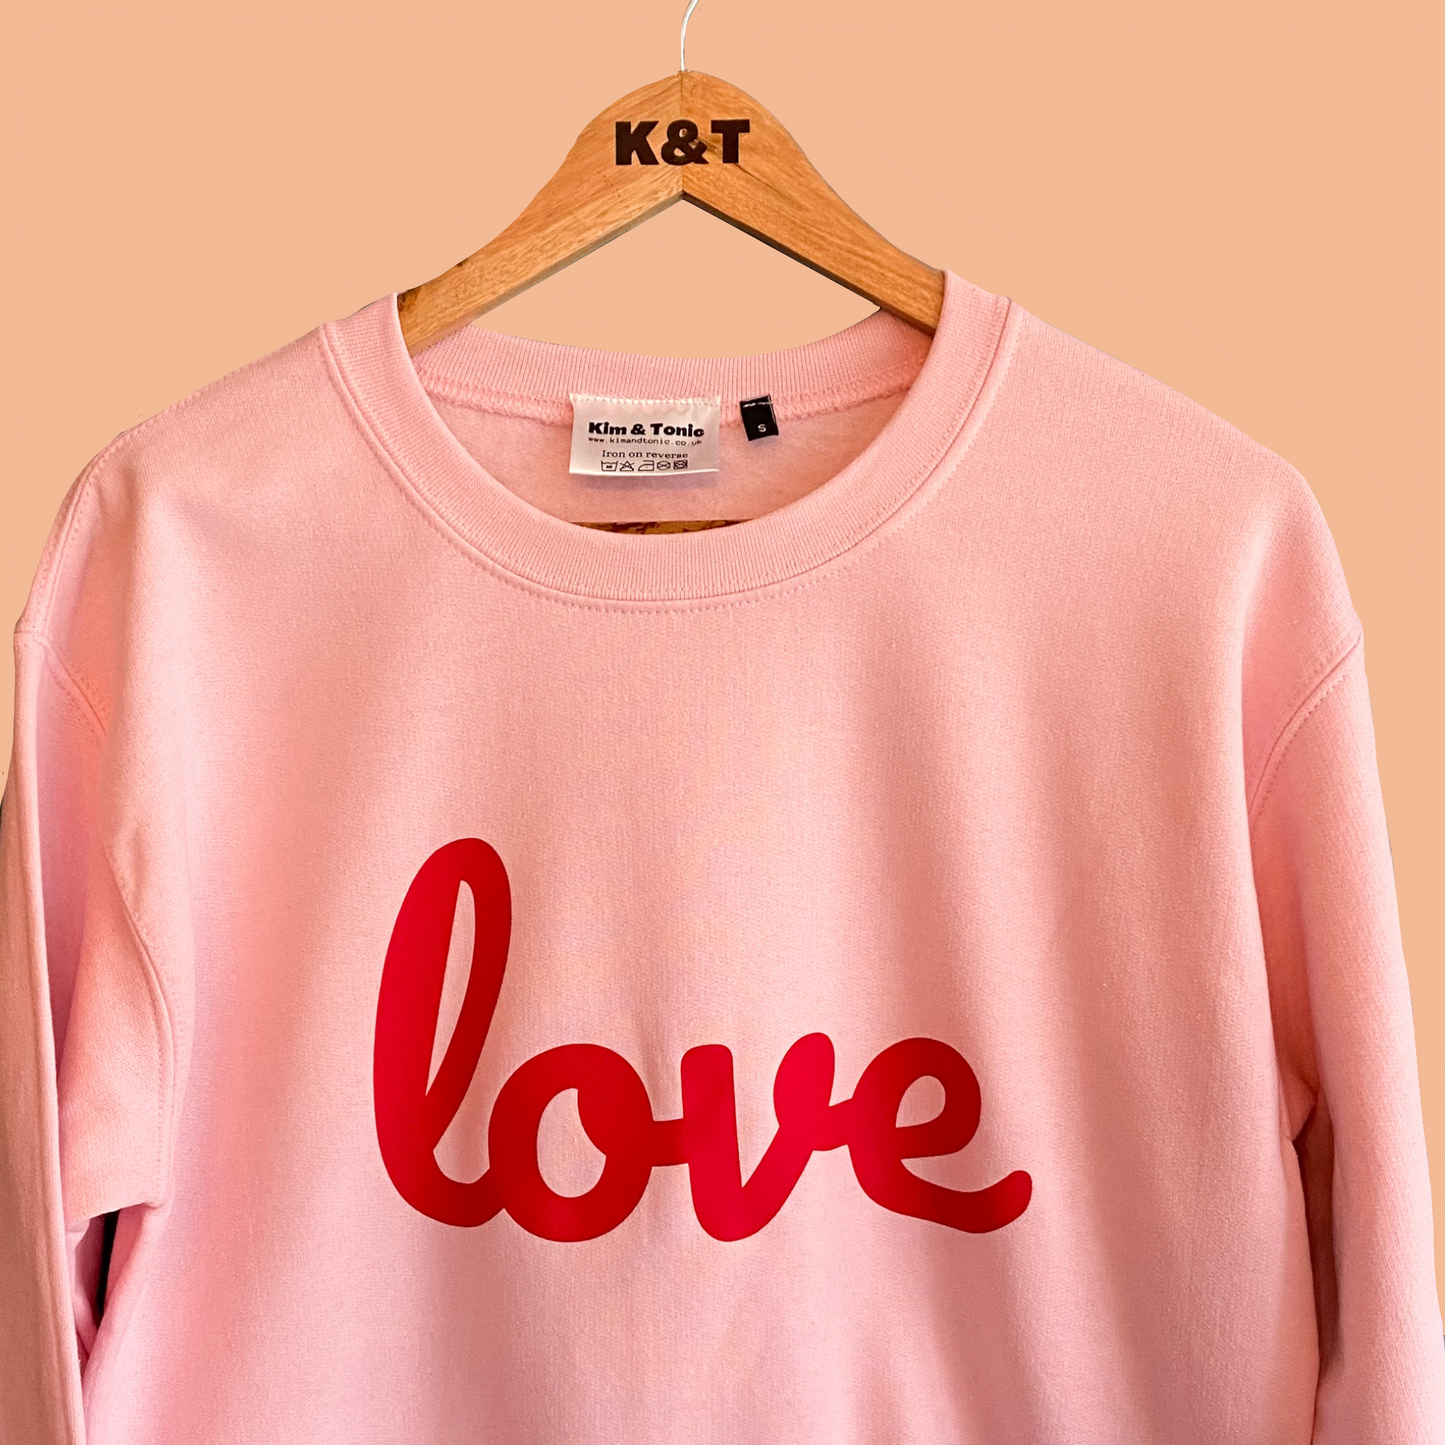 LOVE SWEATSHIRT. Pink with bright red print.